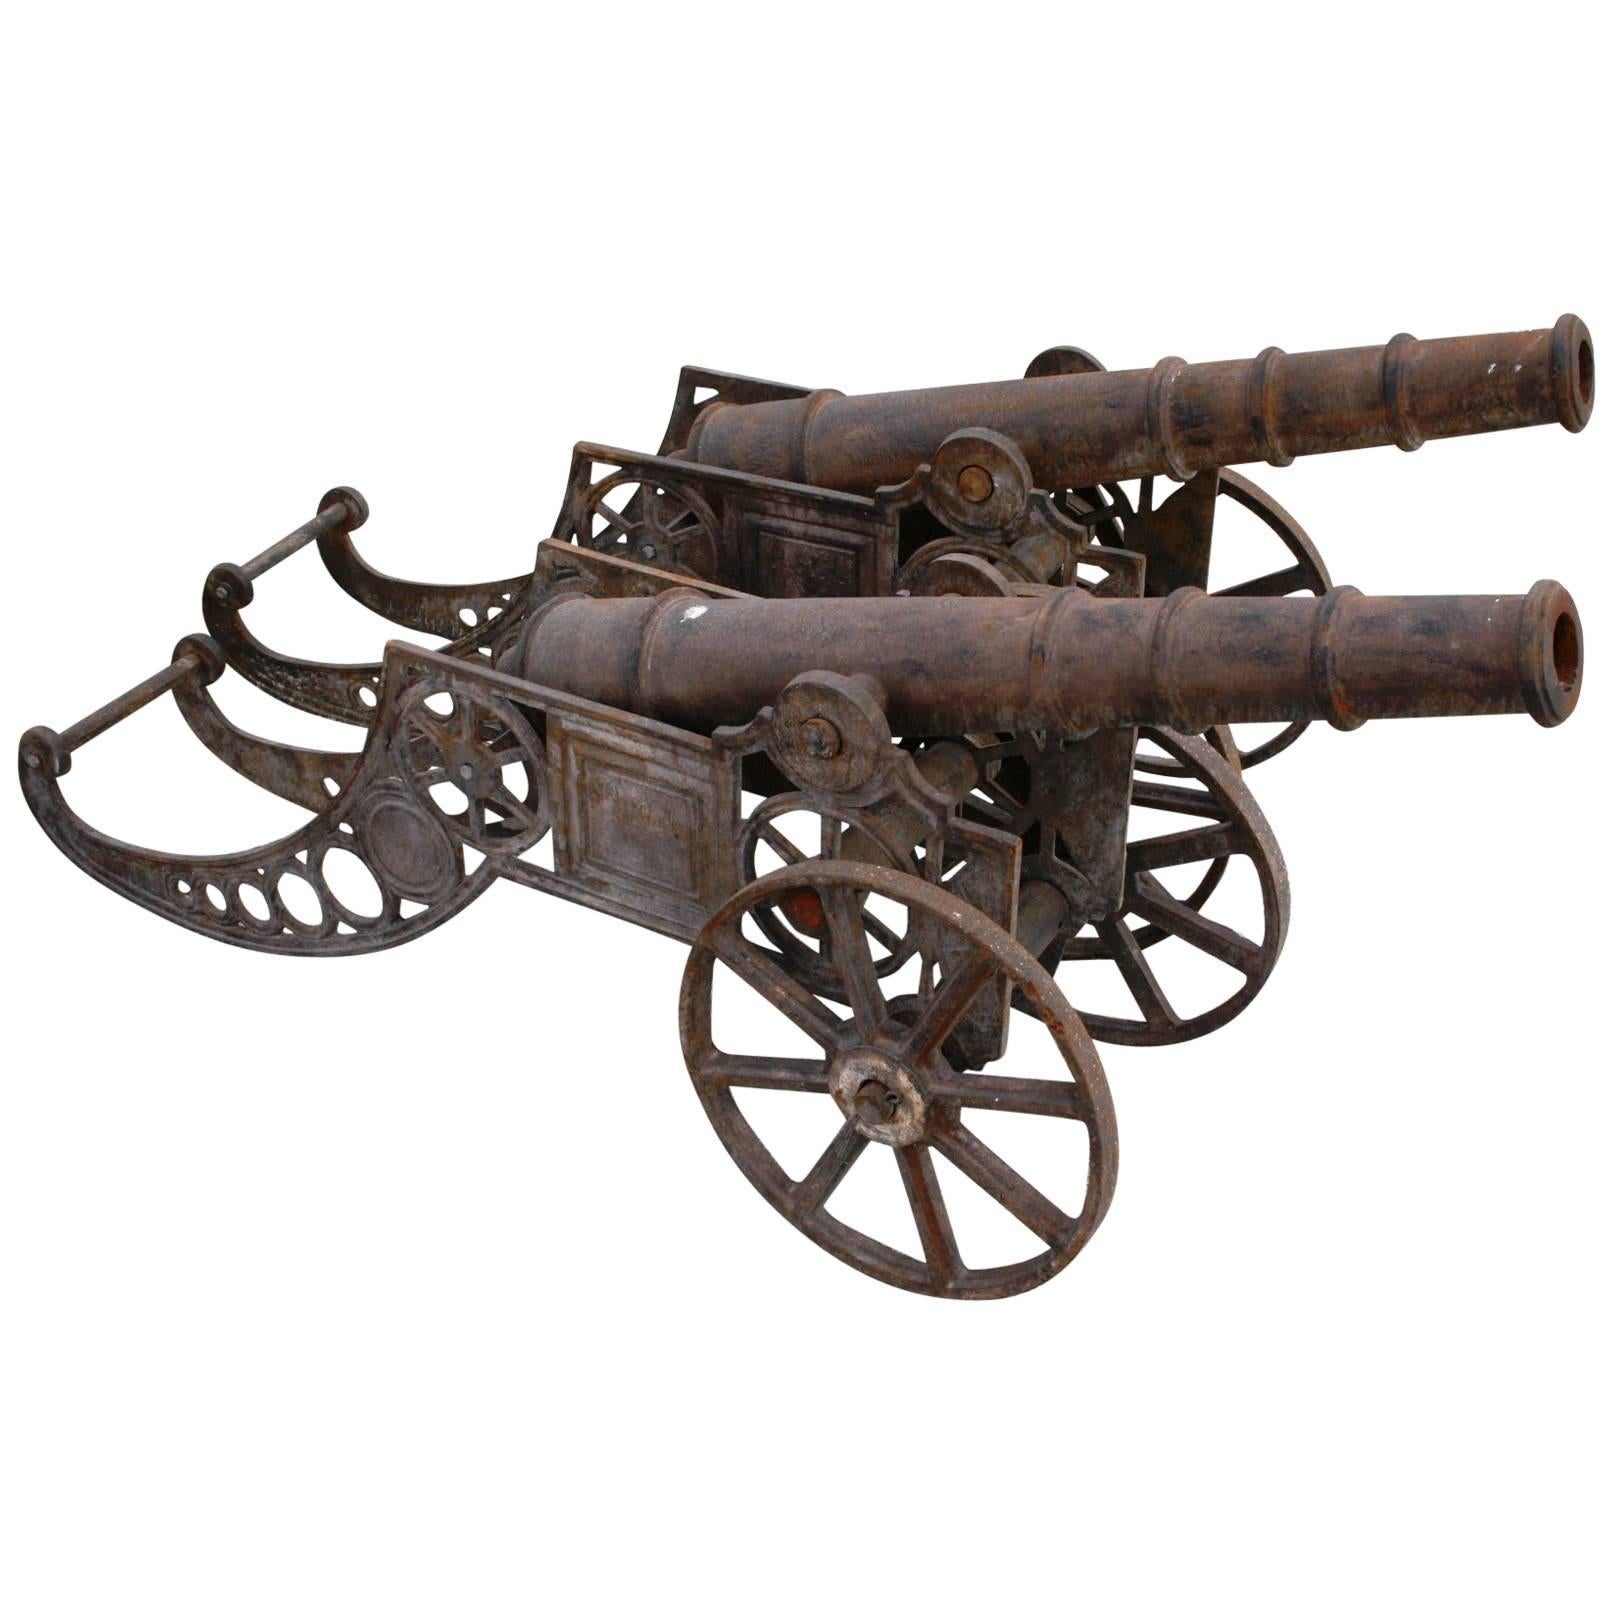 Pair of Cast Iron Cannon on Wheels Reproductions